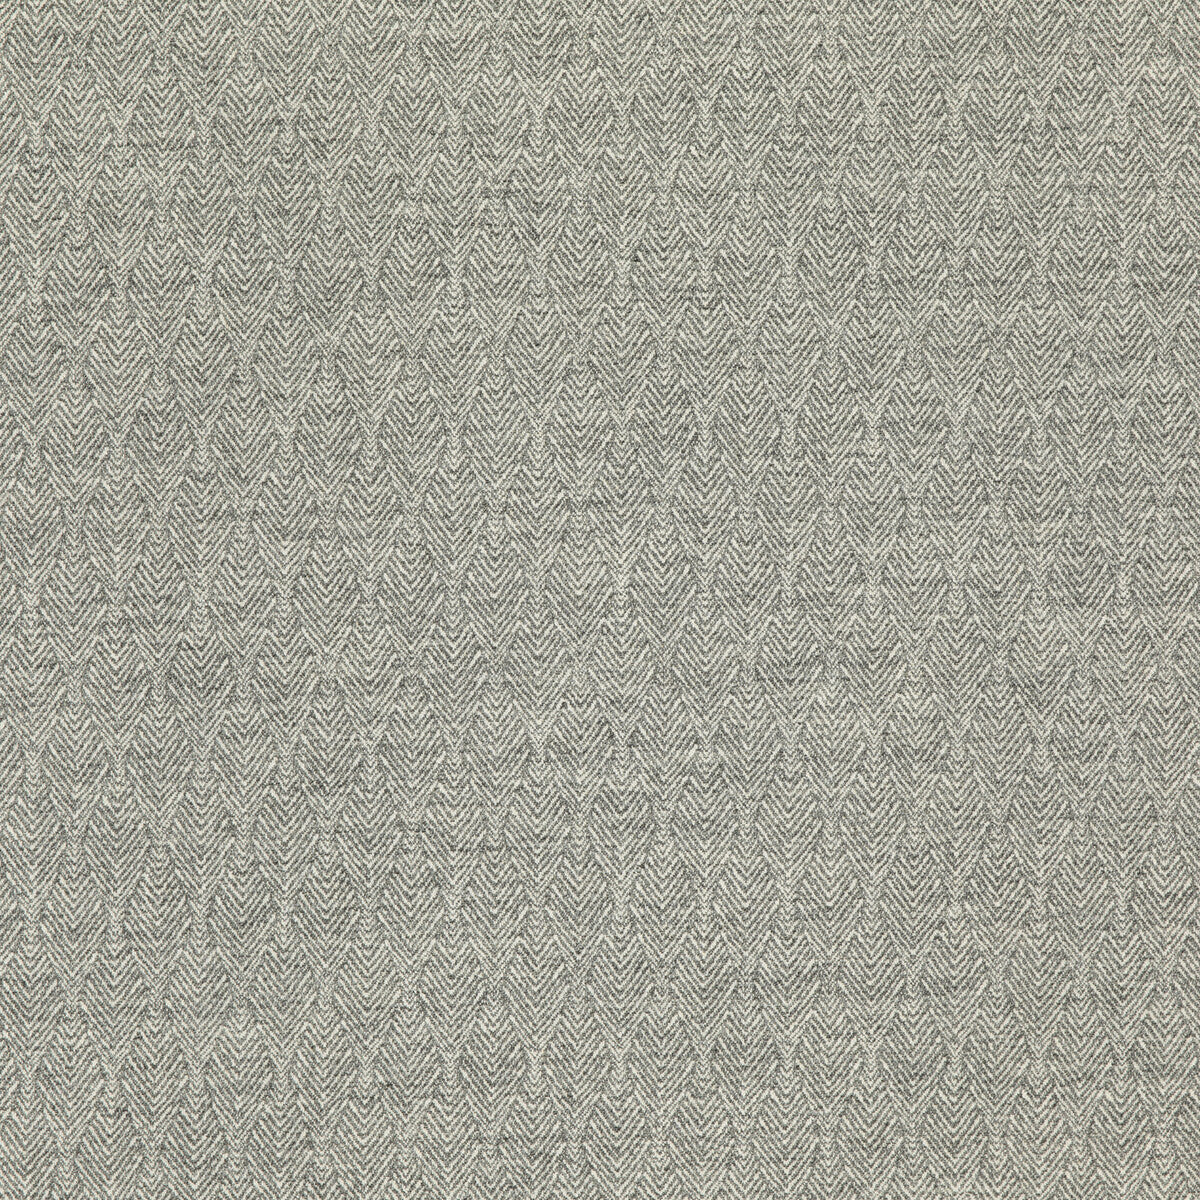 Capo fabric in soft grey color - pattern ED85298.926.0 - by Threads in the Luxury Weaves collection